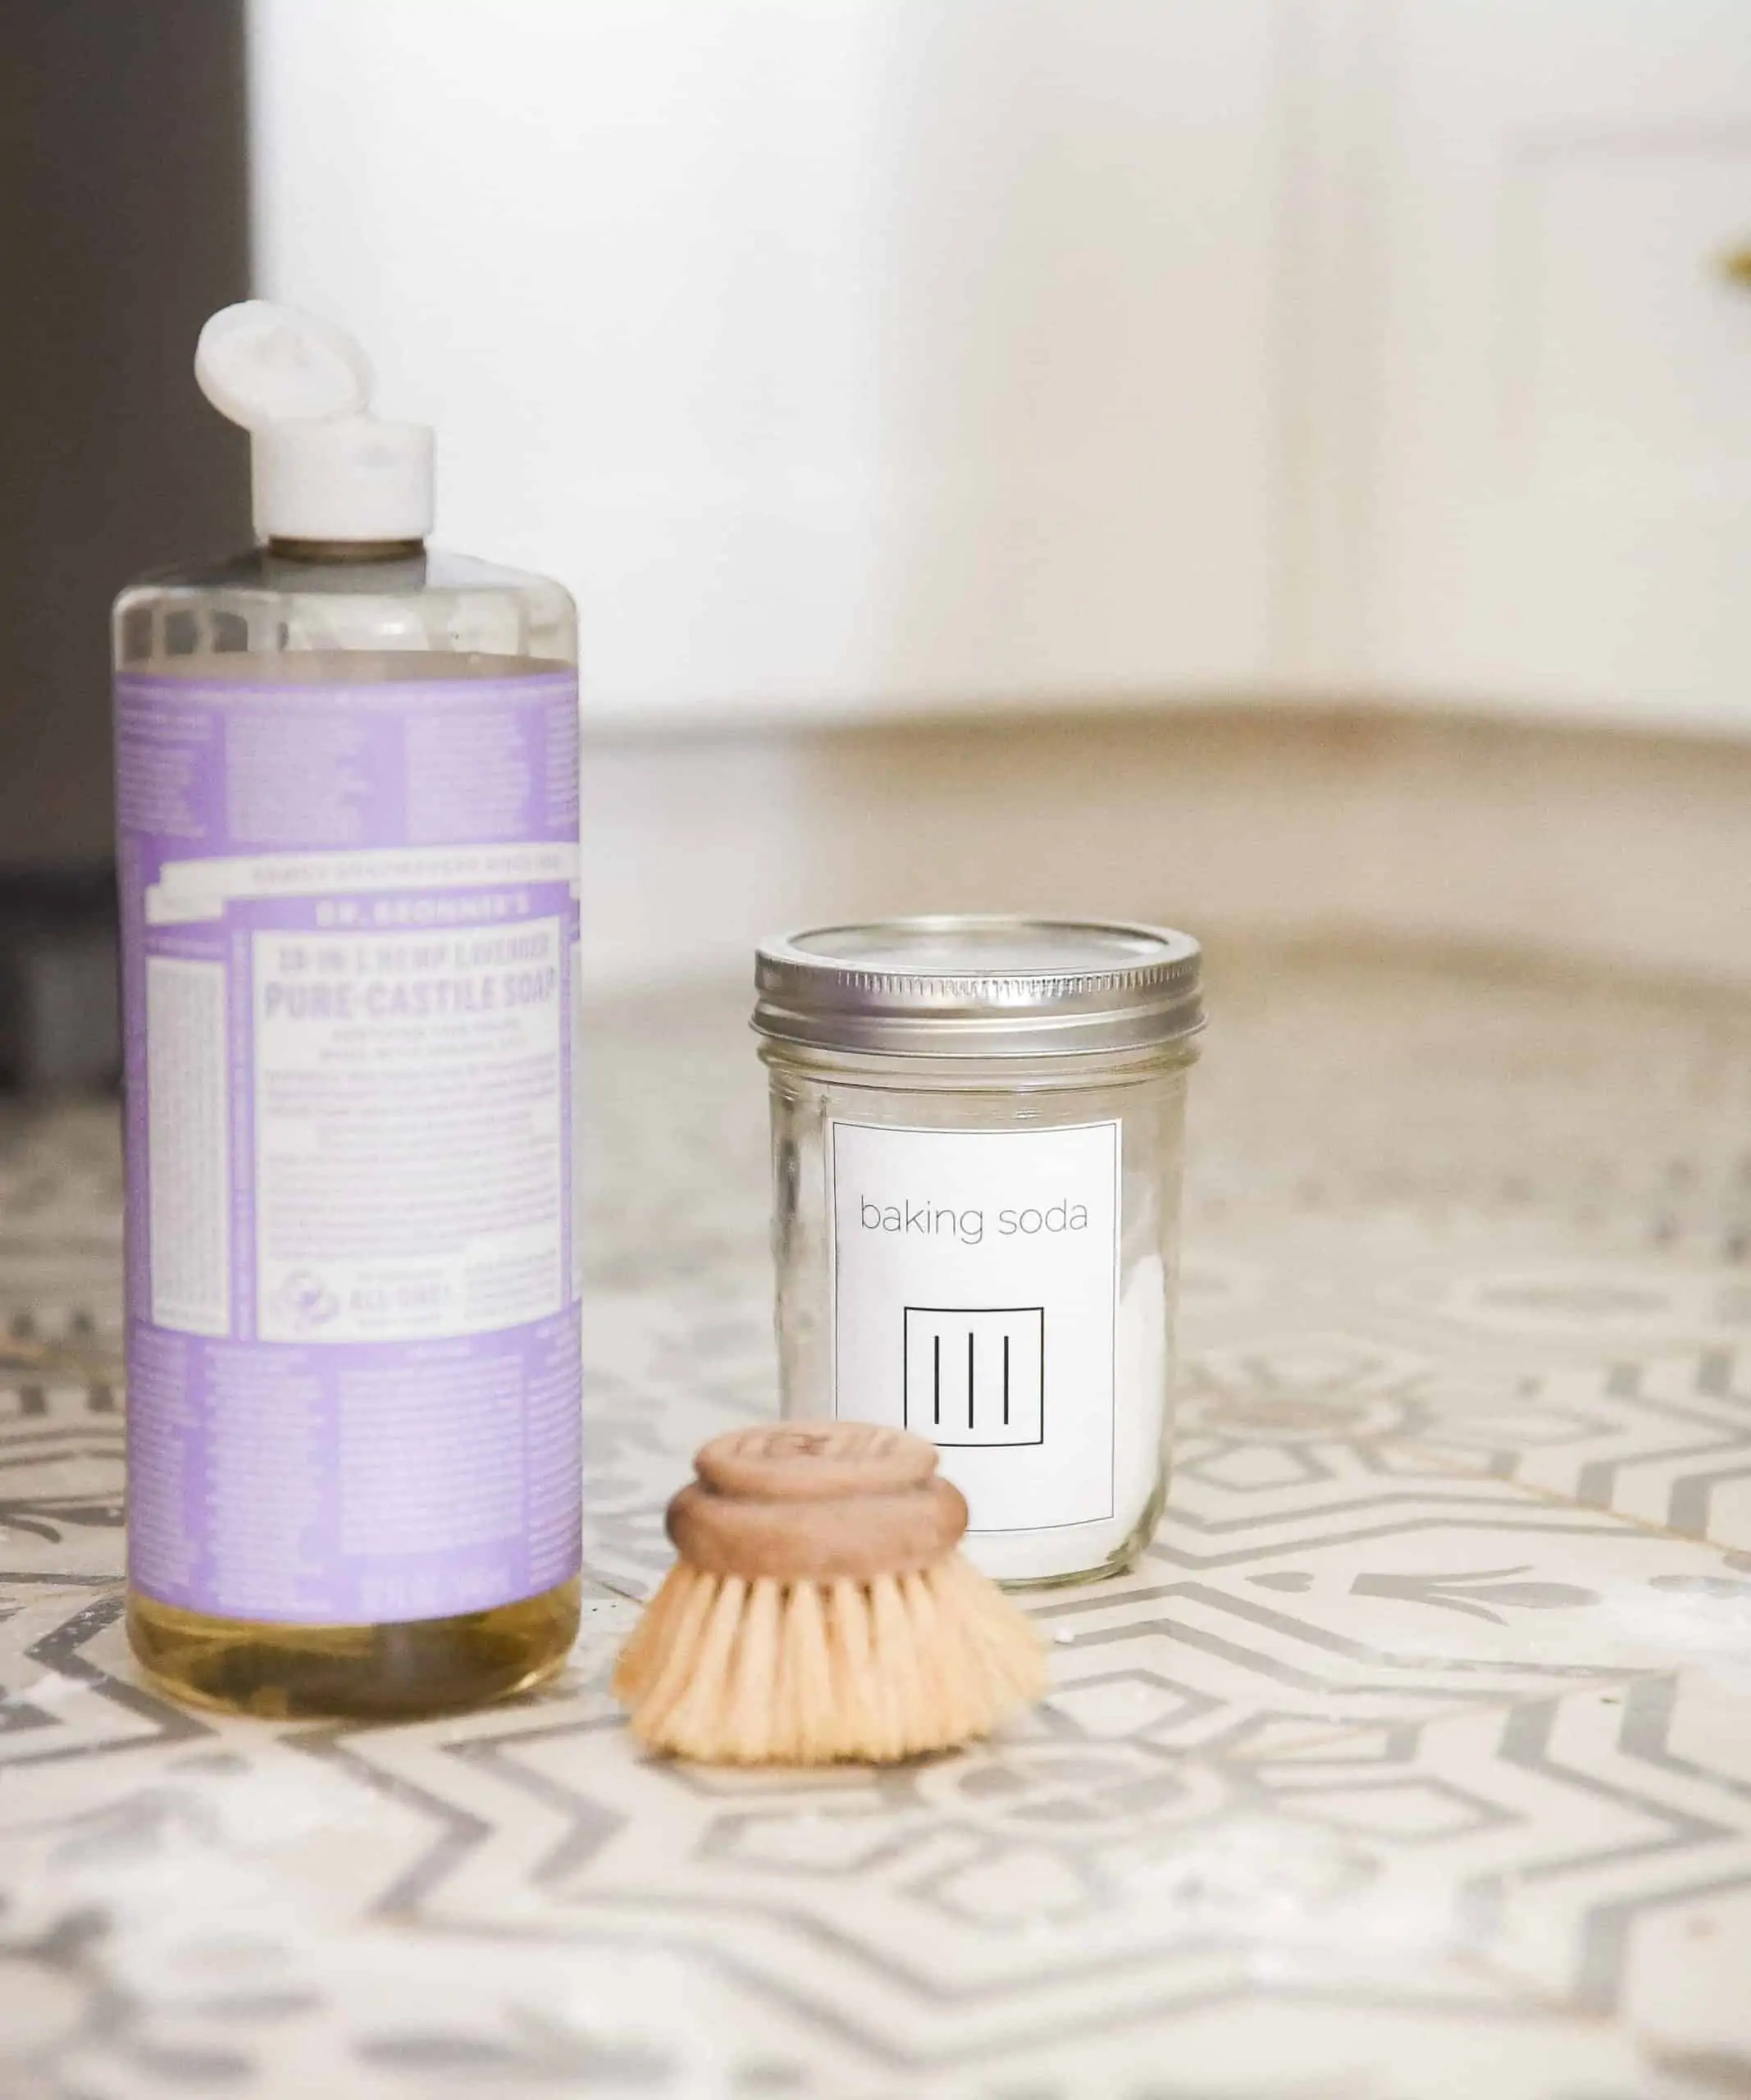 Make your own homemade grout cleaner with just two all-natural ingredients! This simple grout cleaner is amazing for white grout and to clean dirty tile floors naturally! 